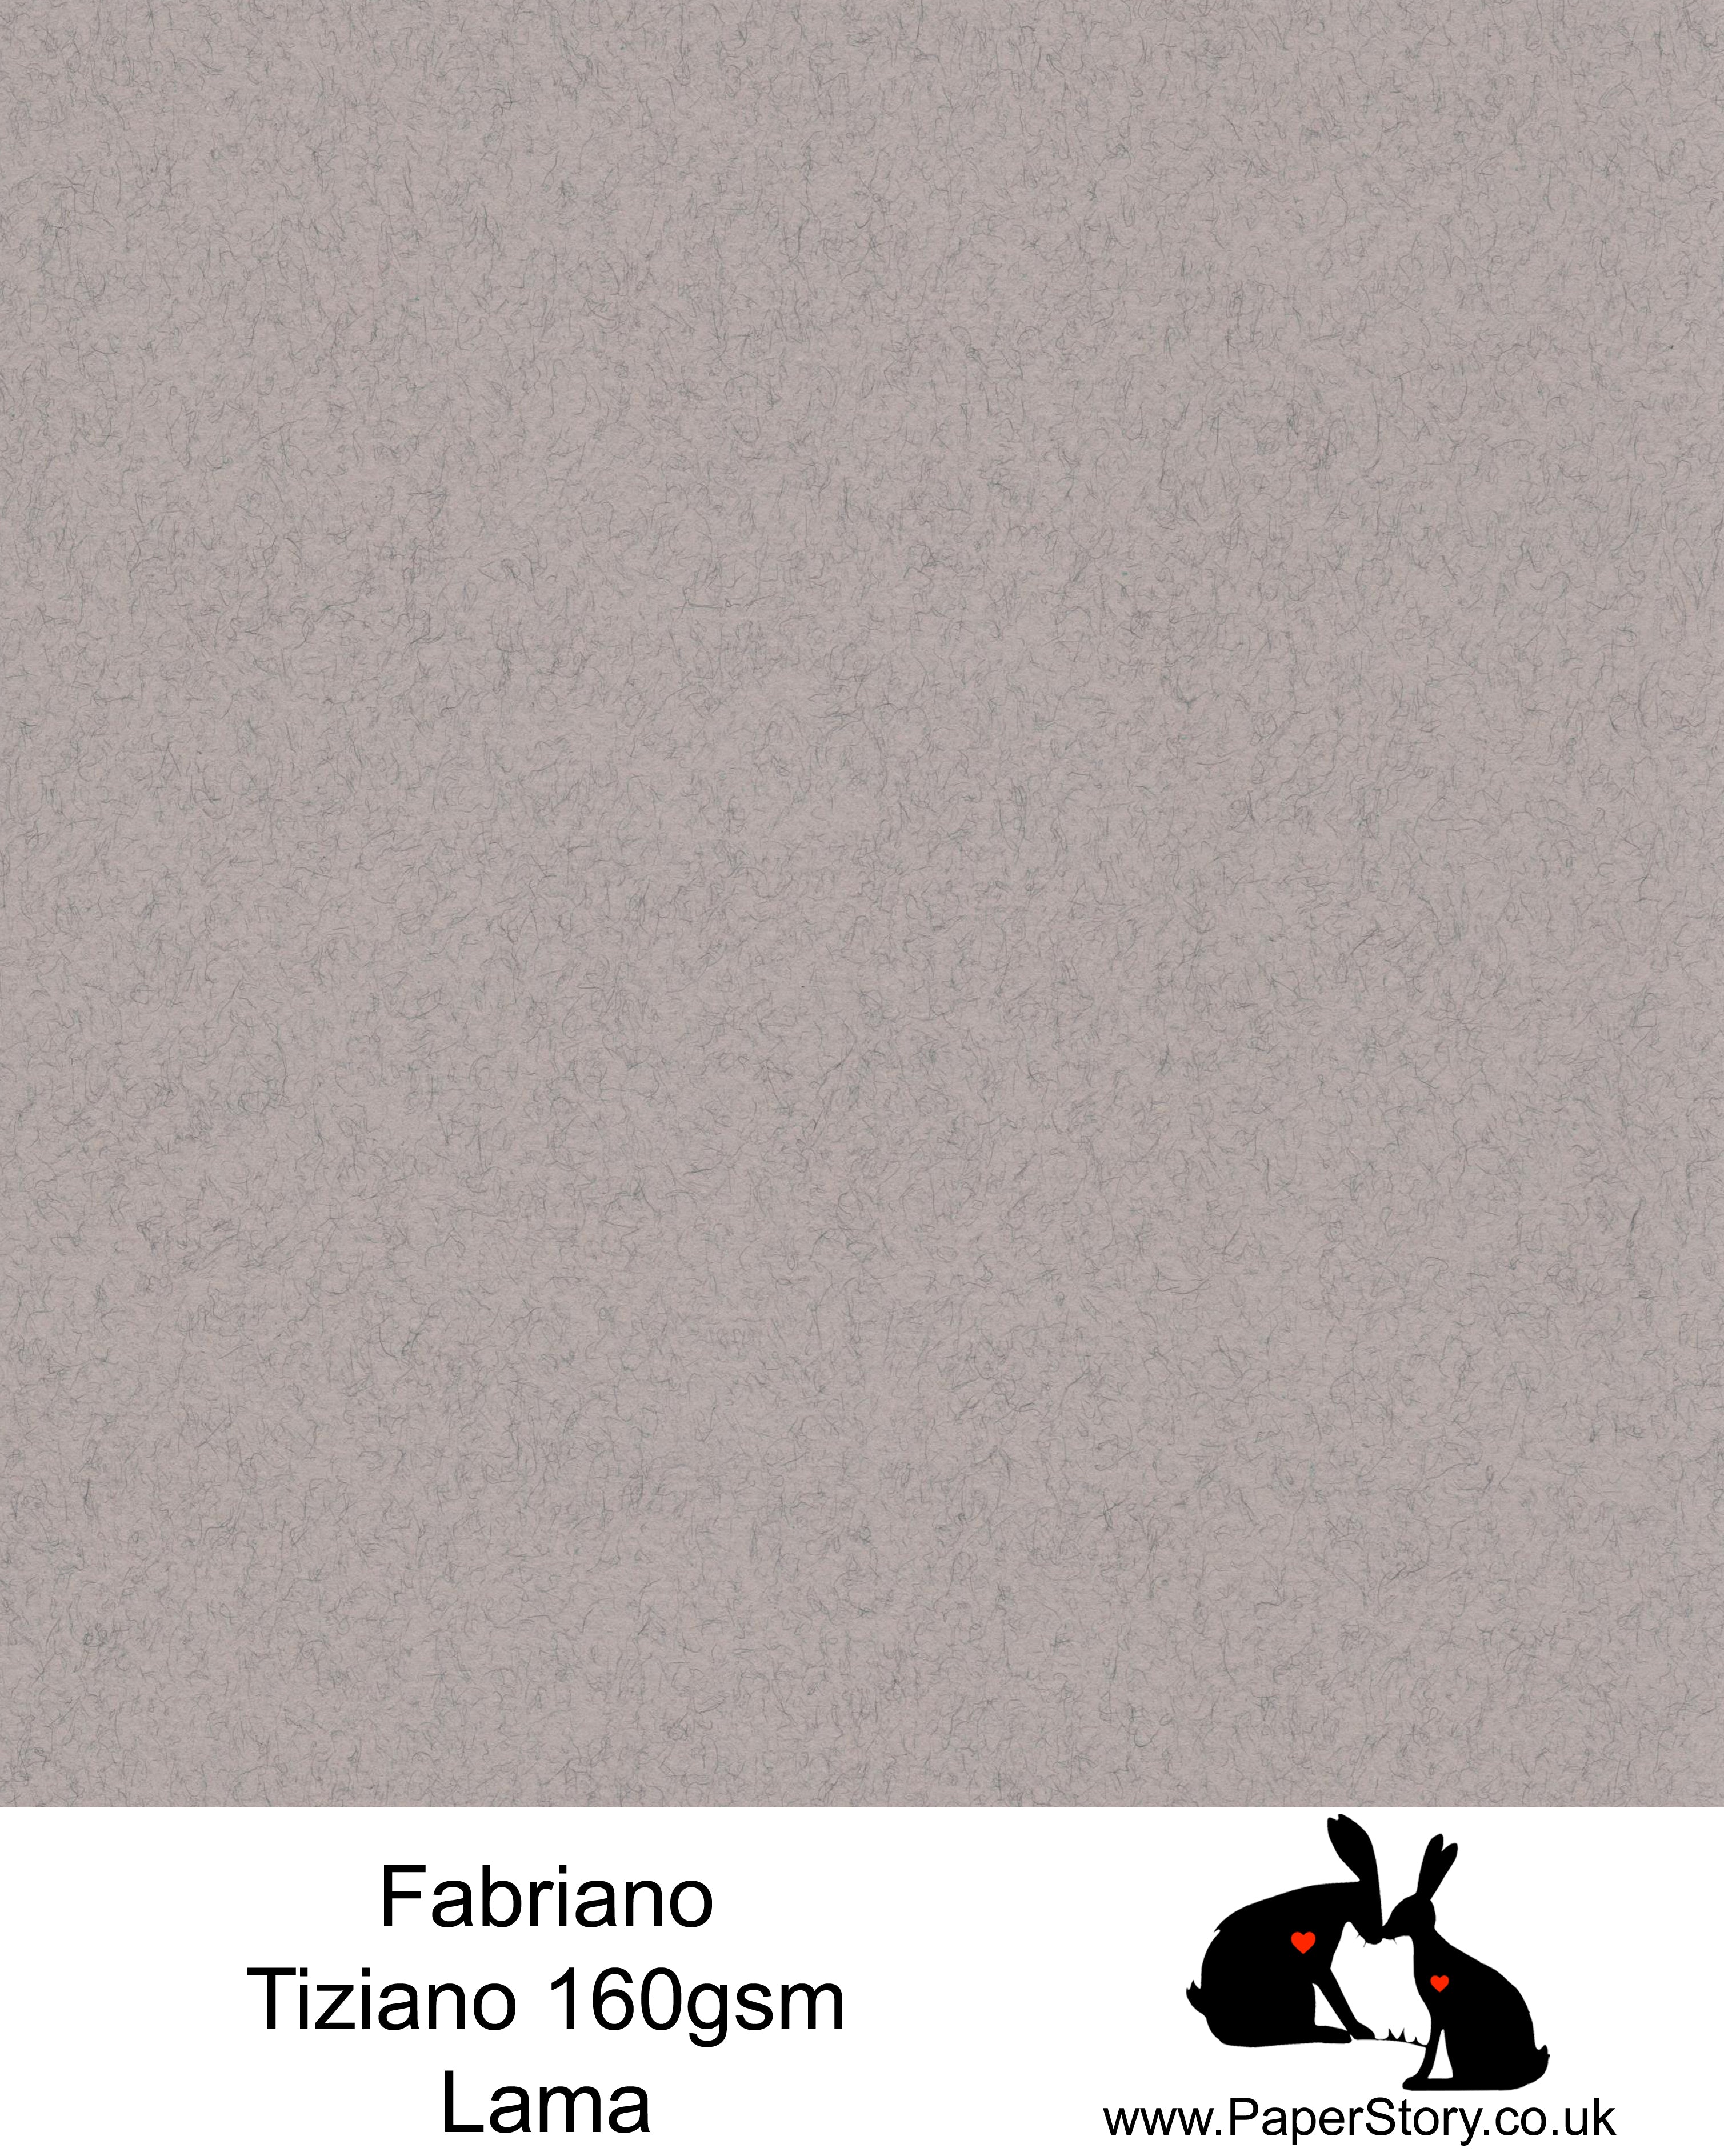 High quality paper from Italy, Lama felted textured soft grey with a hint of warmth. Fabriano Tiziano is 160 gsm, Tiziano has a high cotton content, a textured naturally sized surface. This paper is acid free to guarantee long permanence in time, pH neutral. It has highly lightfast colours, an excellent surface making and sizing which make this paper particularly suitable for papercutting